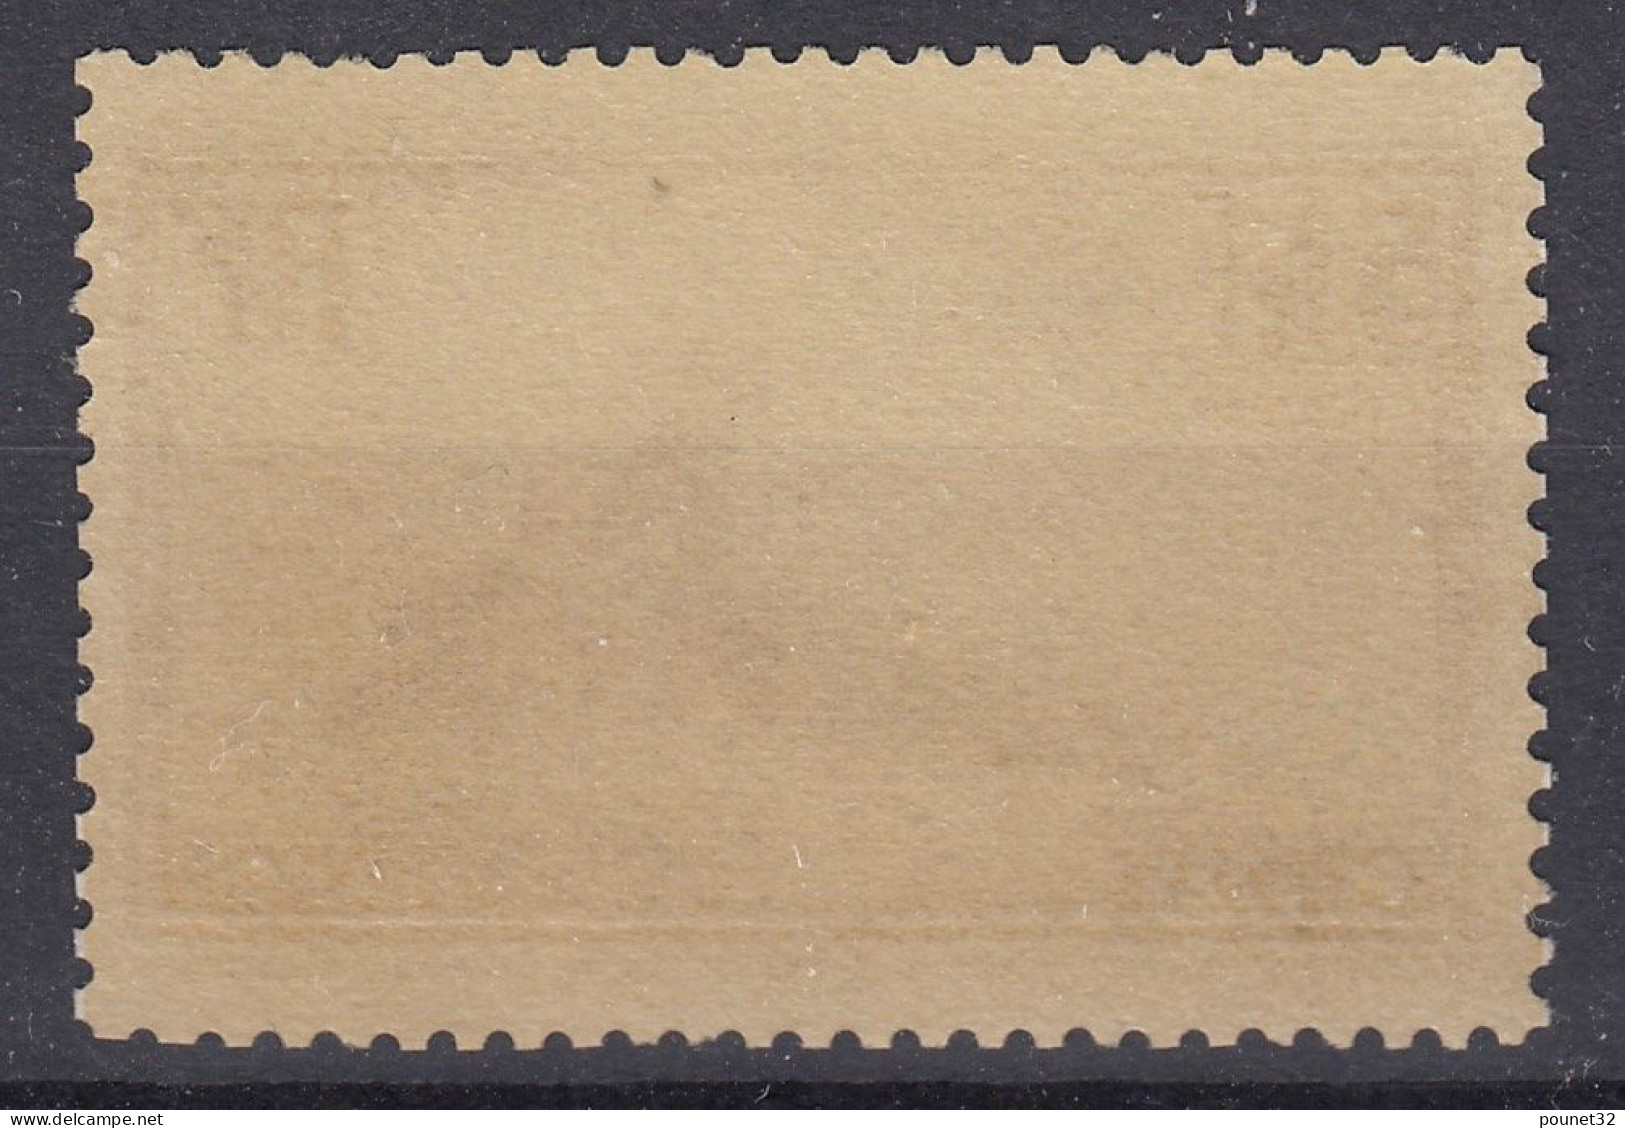 TIMBRE FRANCE MONT ST MICHEL N° 260a TYPE I NEUF ** GOMME SANS CHARNIERE - Unused Stamps